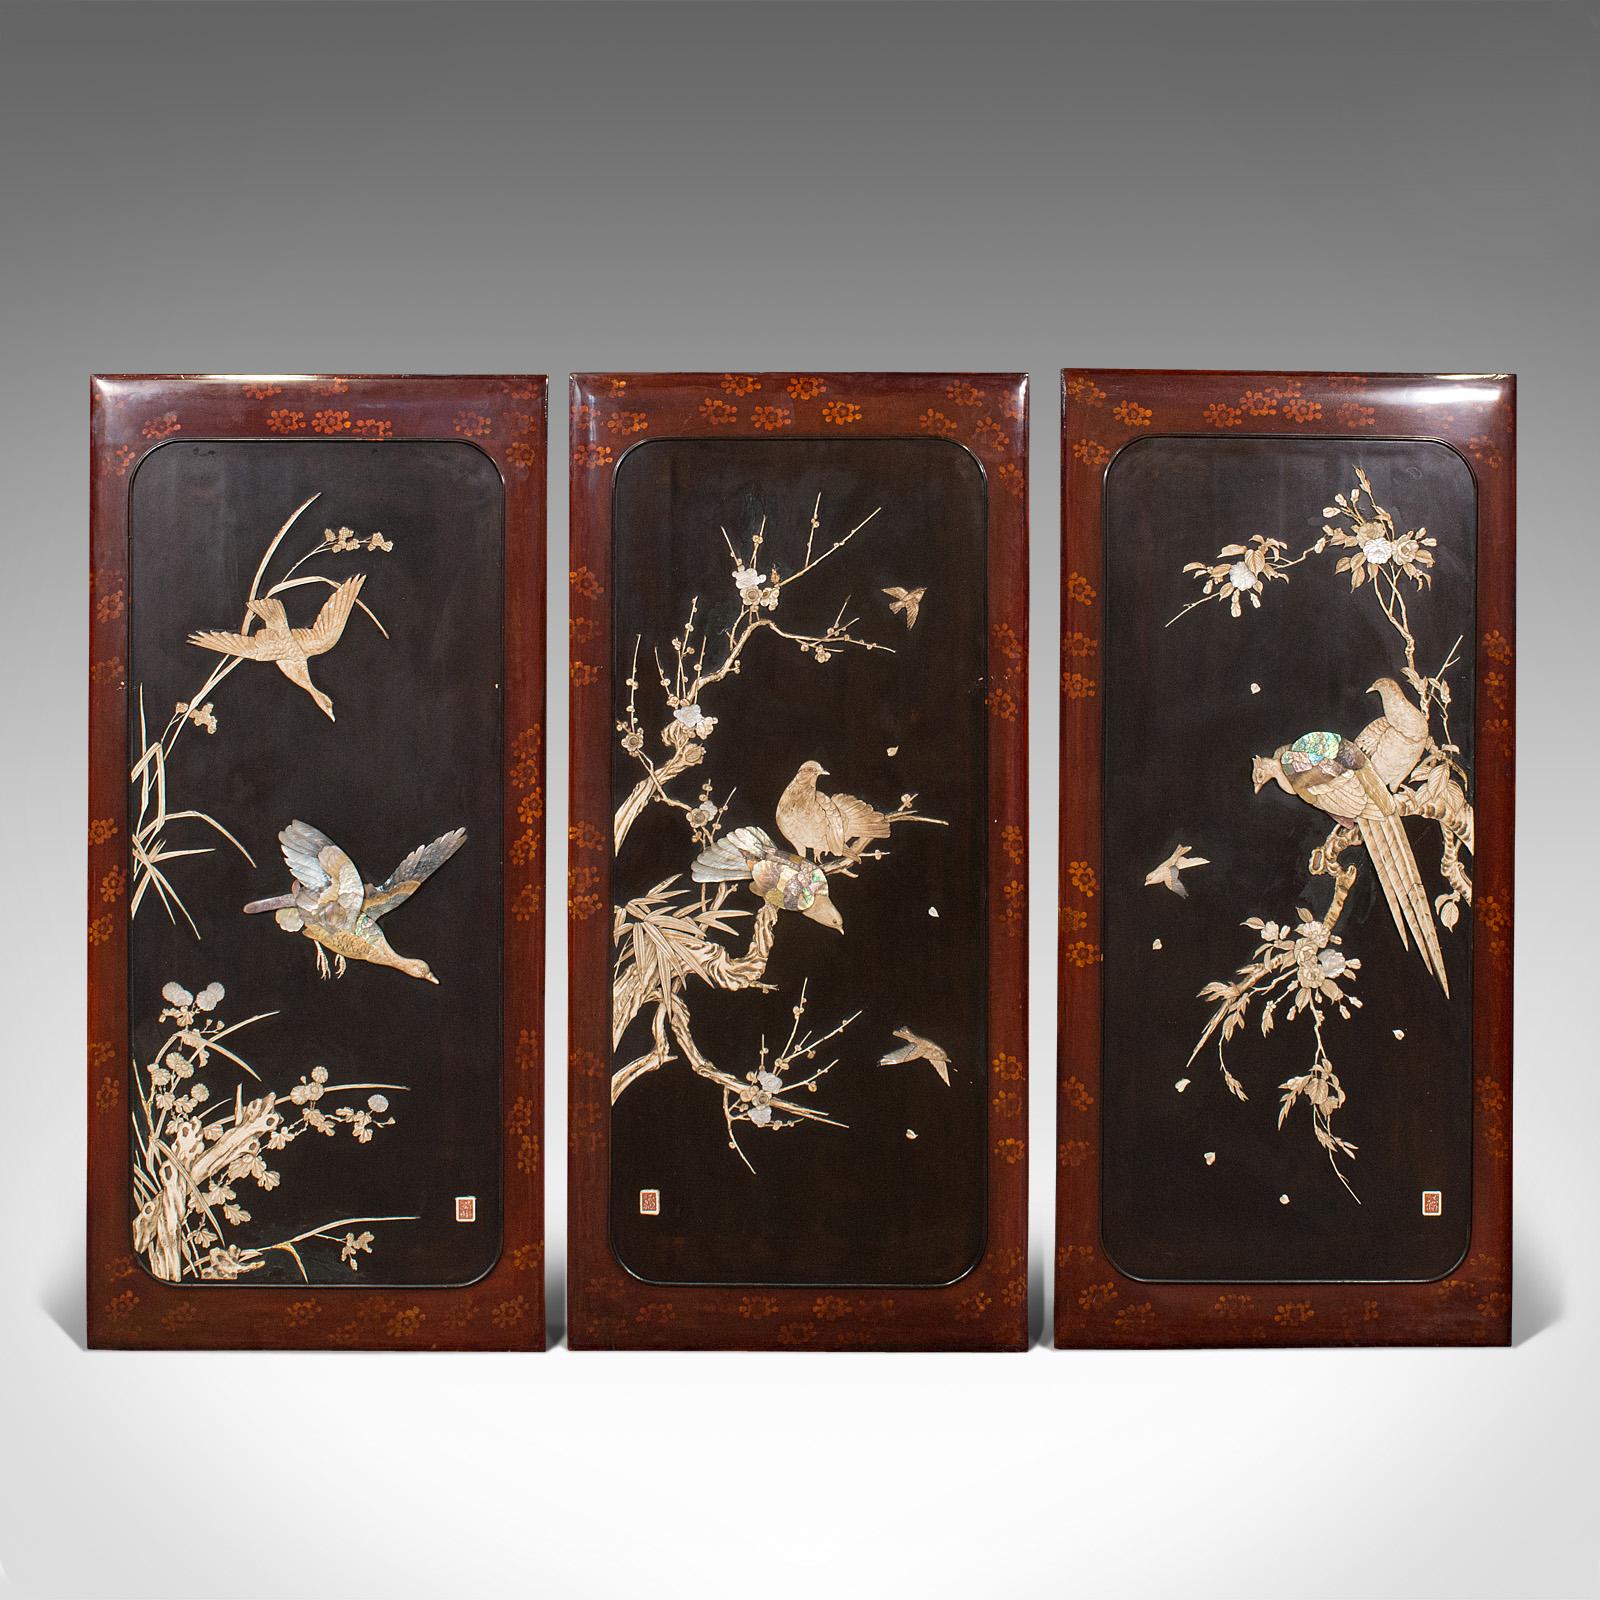 This is a trio of antique Shibayama panels. A Japanese, lacquer decorative screen, dating to the Meiji period, circa 1900.

Fascinating examples of late Victorian, Japanned decorative taste
Displaying a desirable aged patina and in very good